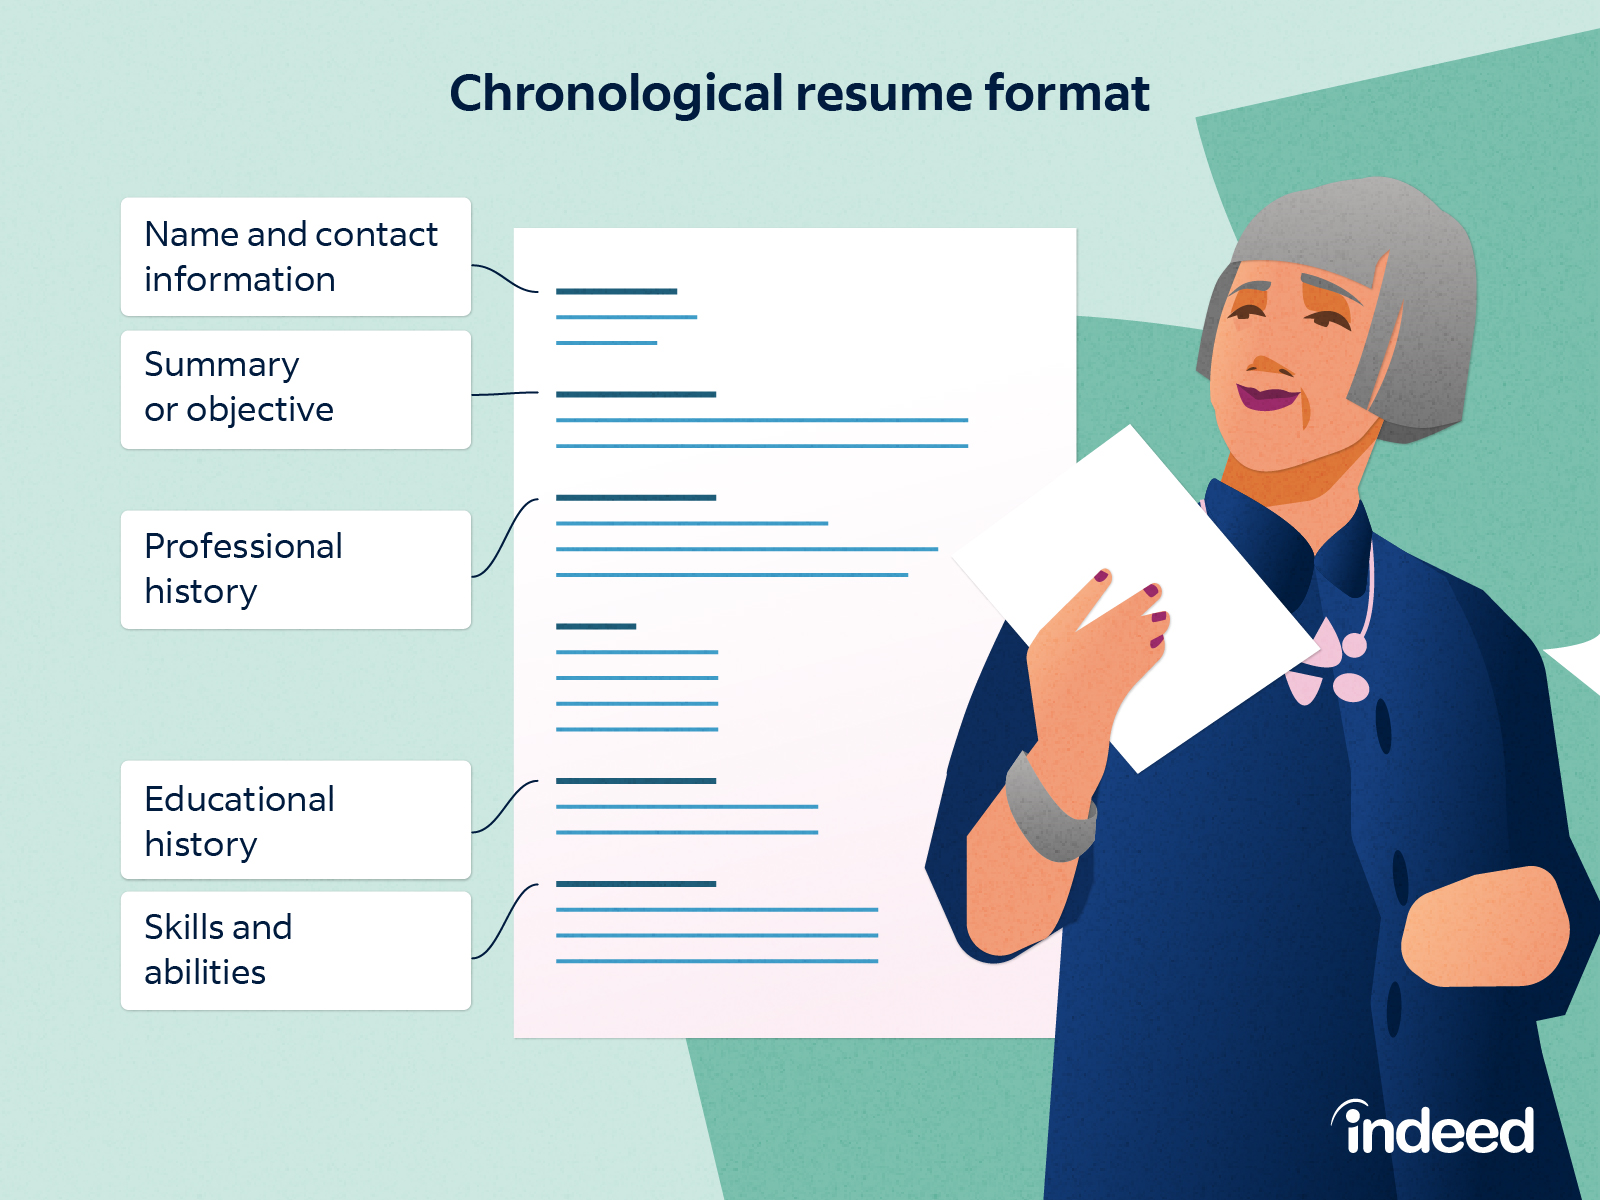 Types of Resumes: Choosing the Right Format For Your Needs